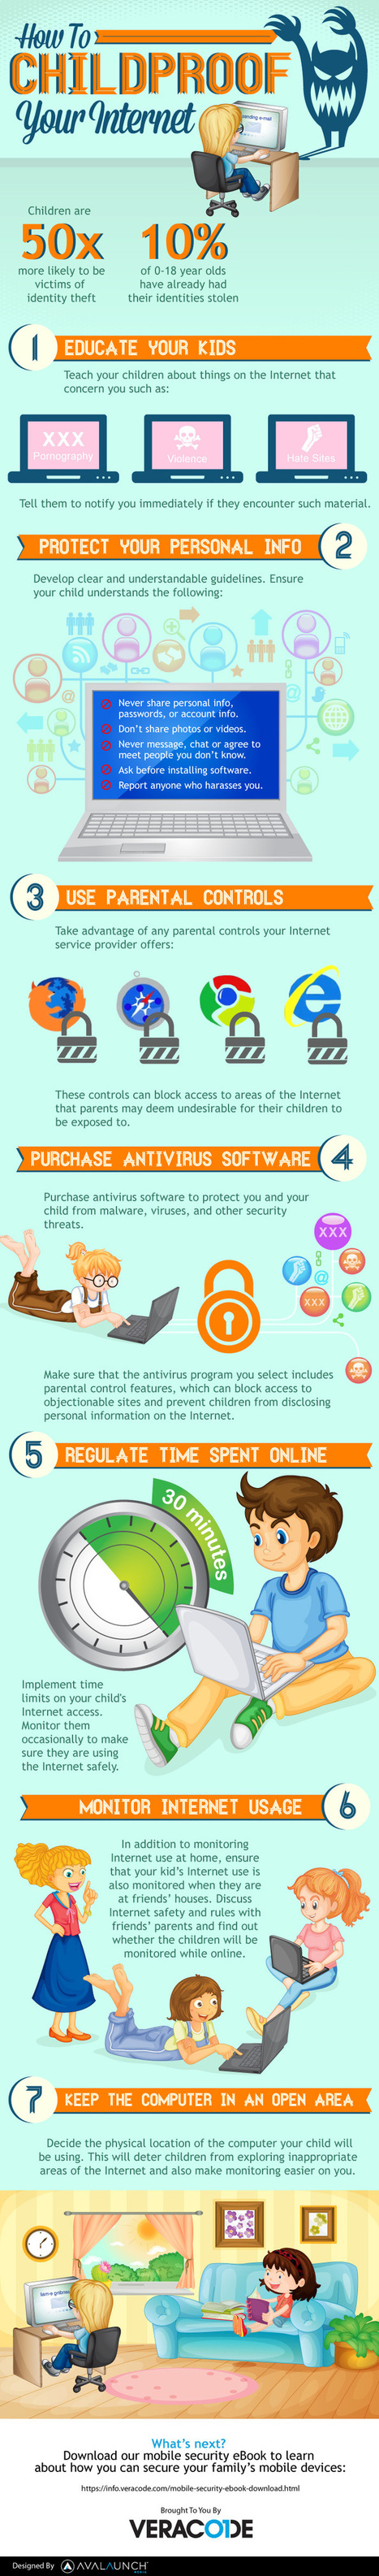 How to Childproof Your Internet [INFOGRAPHIC] | 21st Century Learning and Teaching | Scoop.it